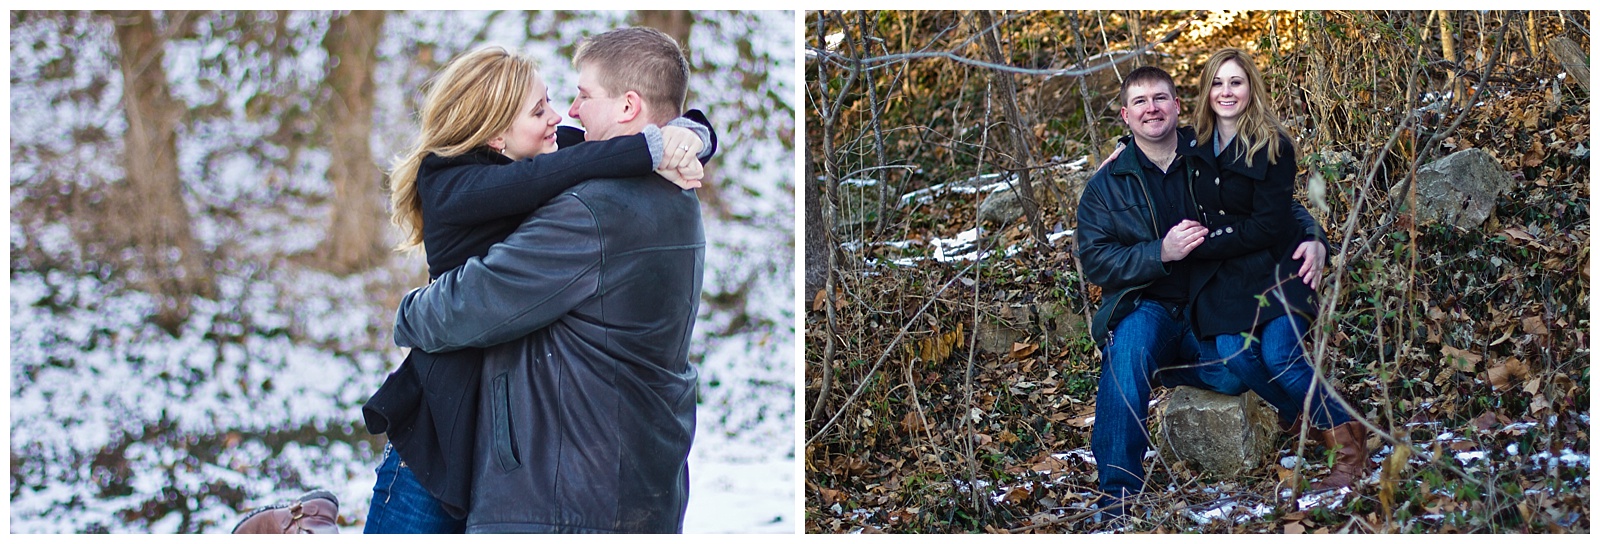 An engagement session at The Elms in Excelsior Springs, Missouri.